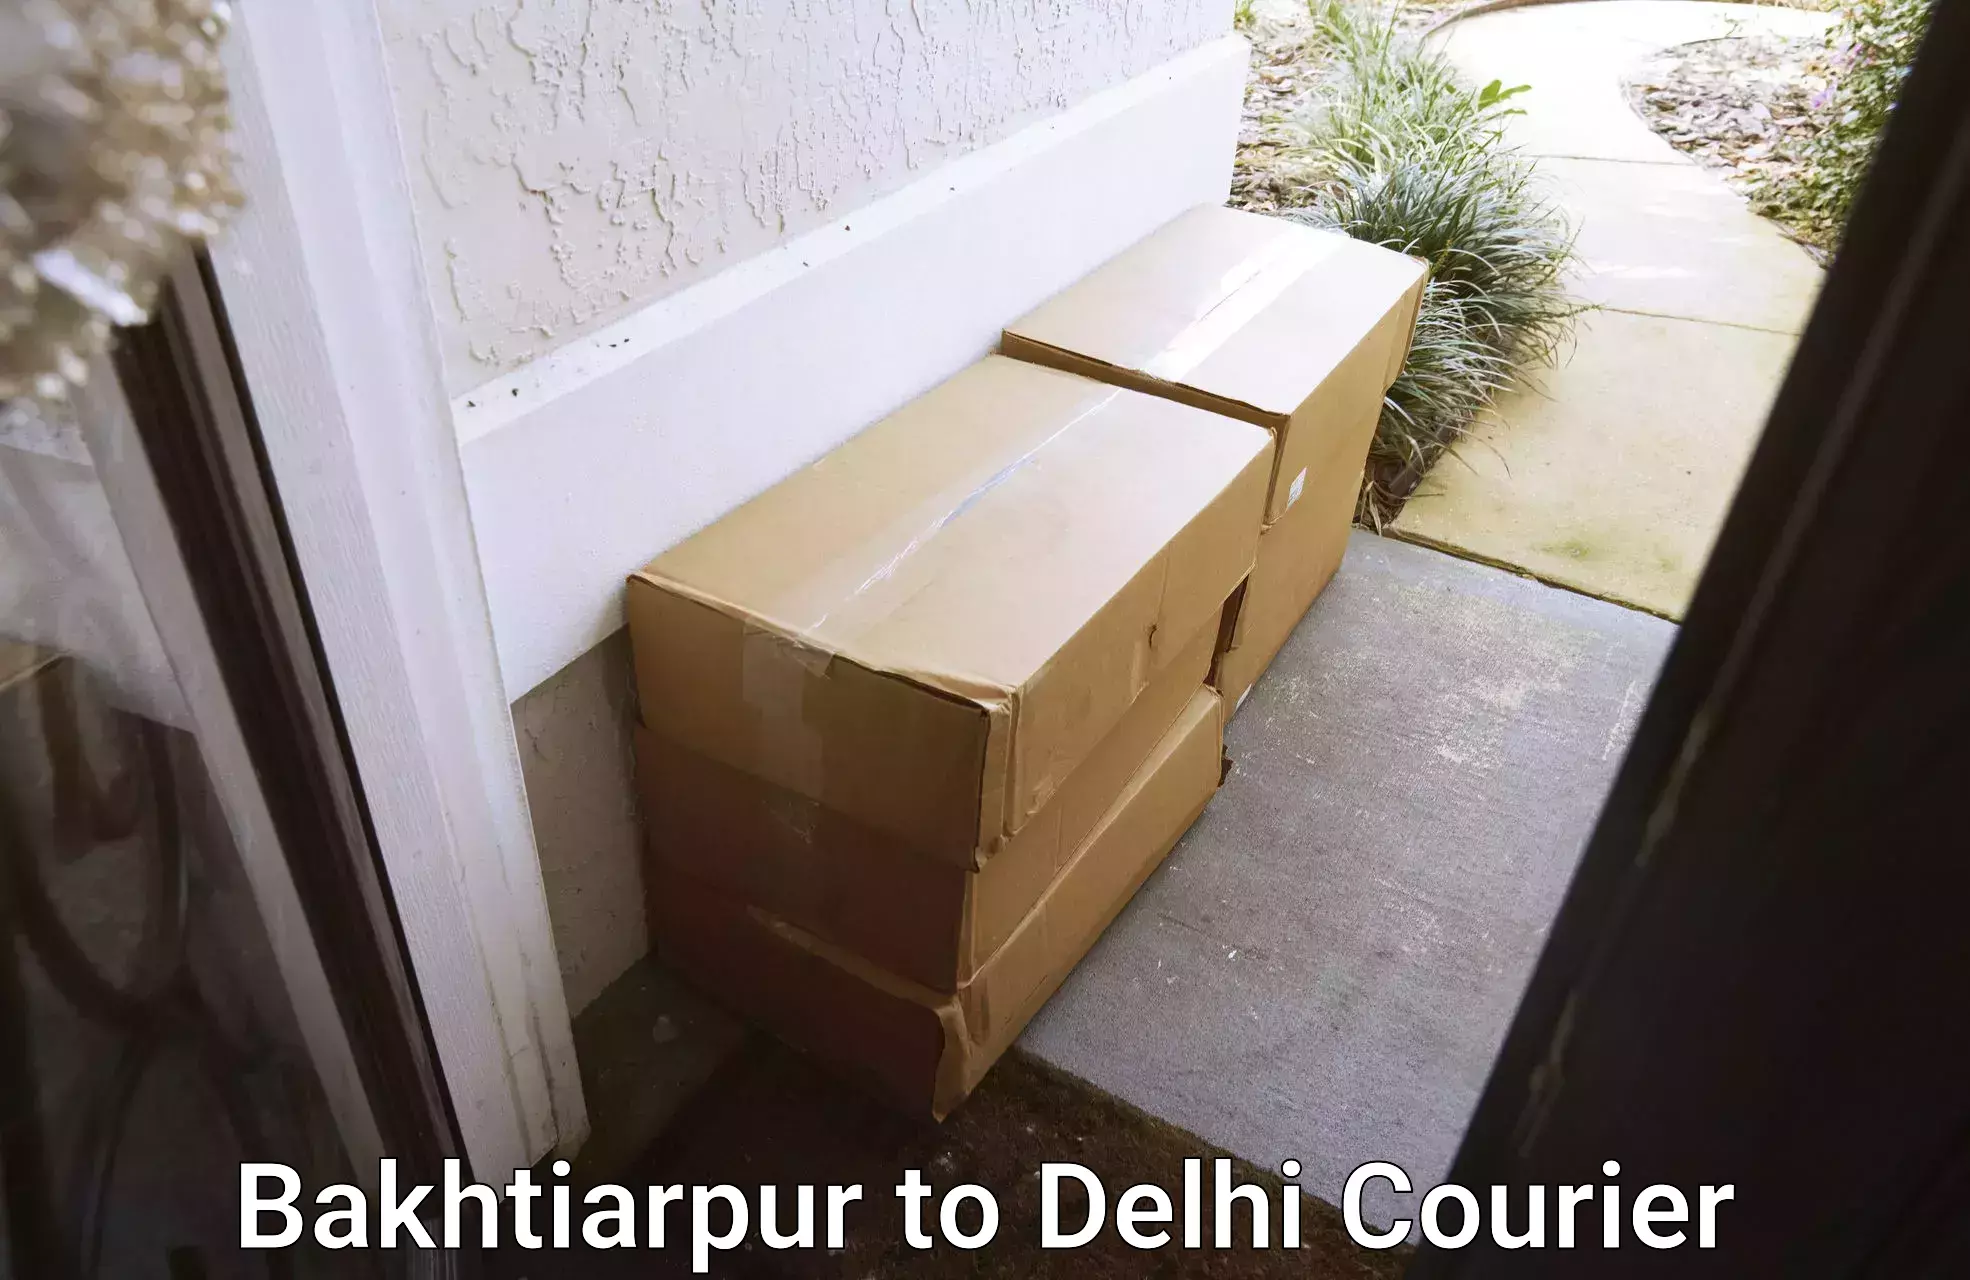 Home moving specialists Bakhtiarpur to Delhi